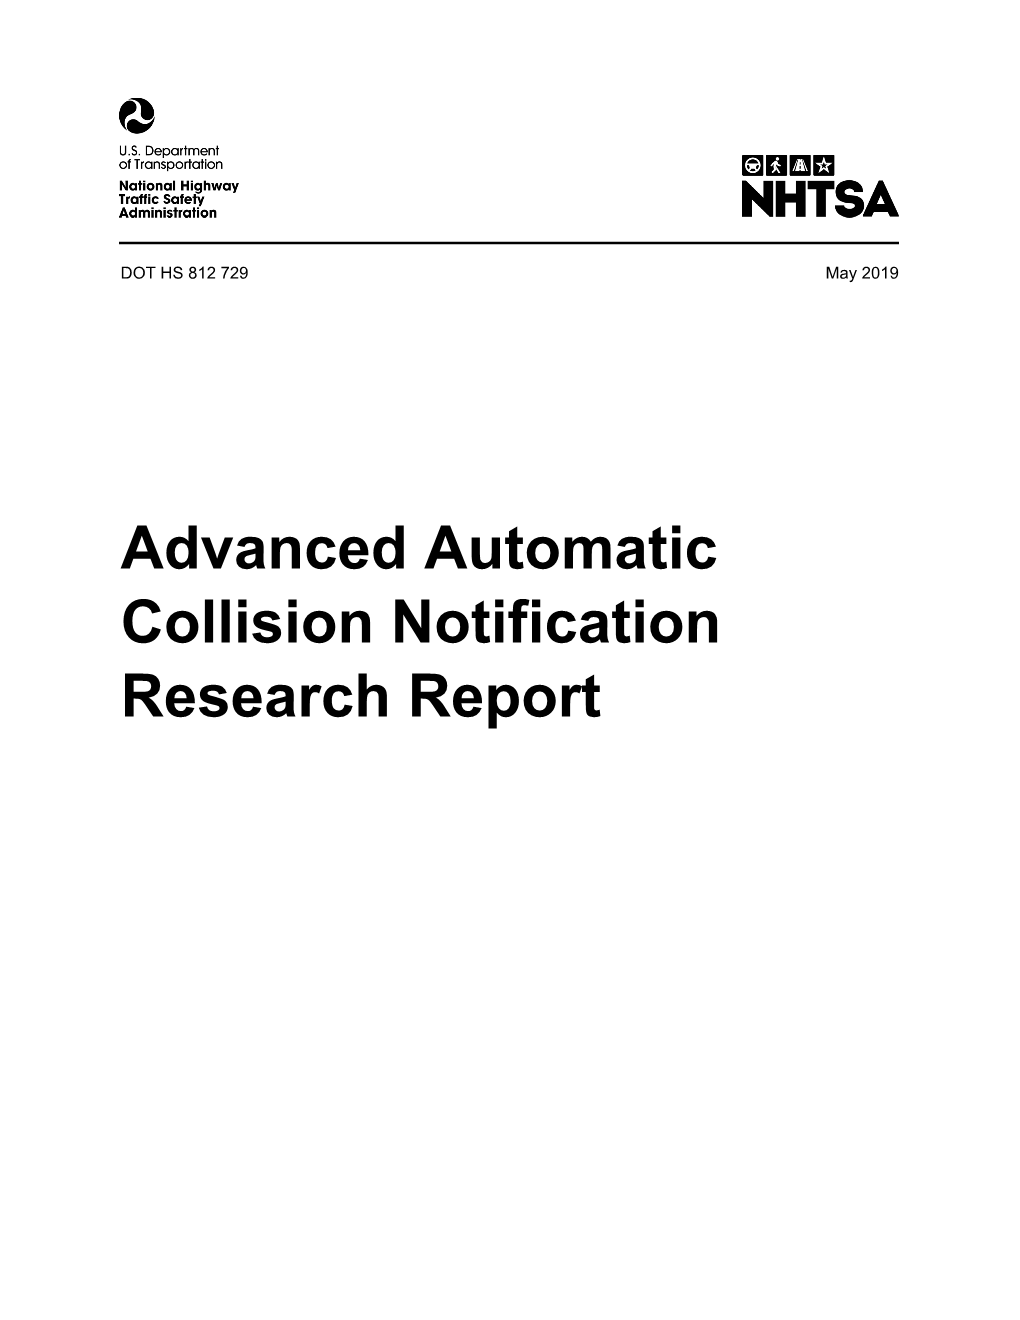 Advanced Automatic Collision Notification Research Report